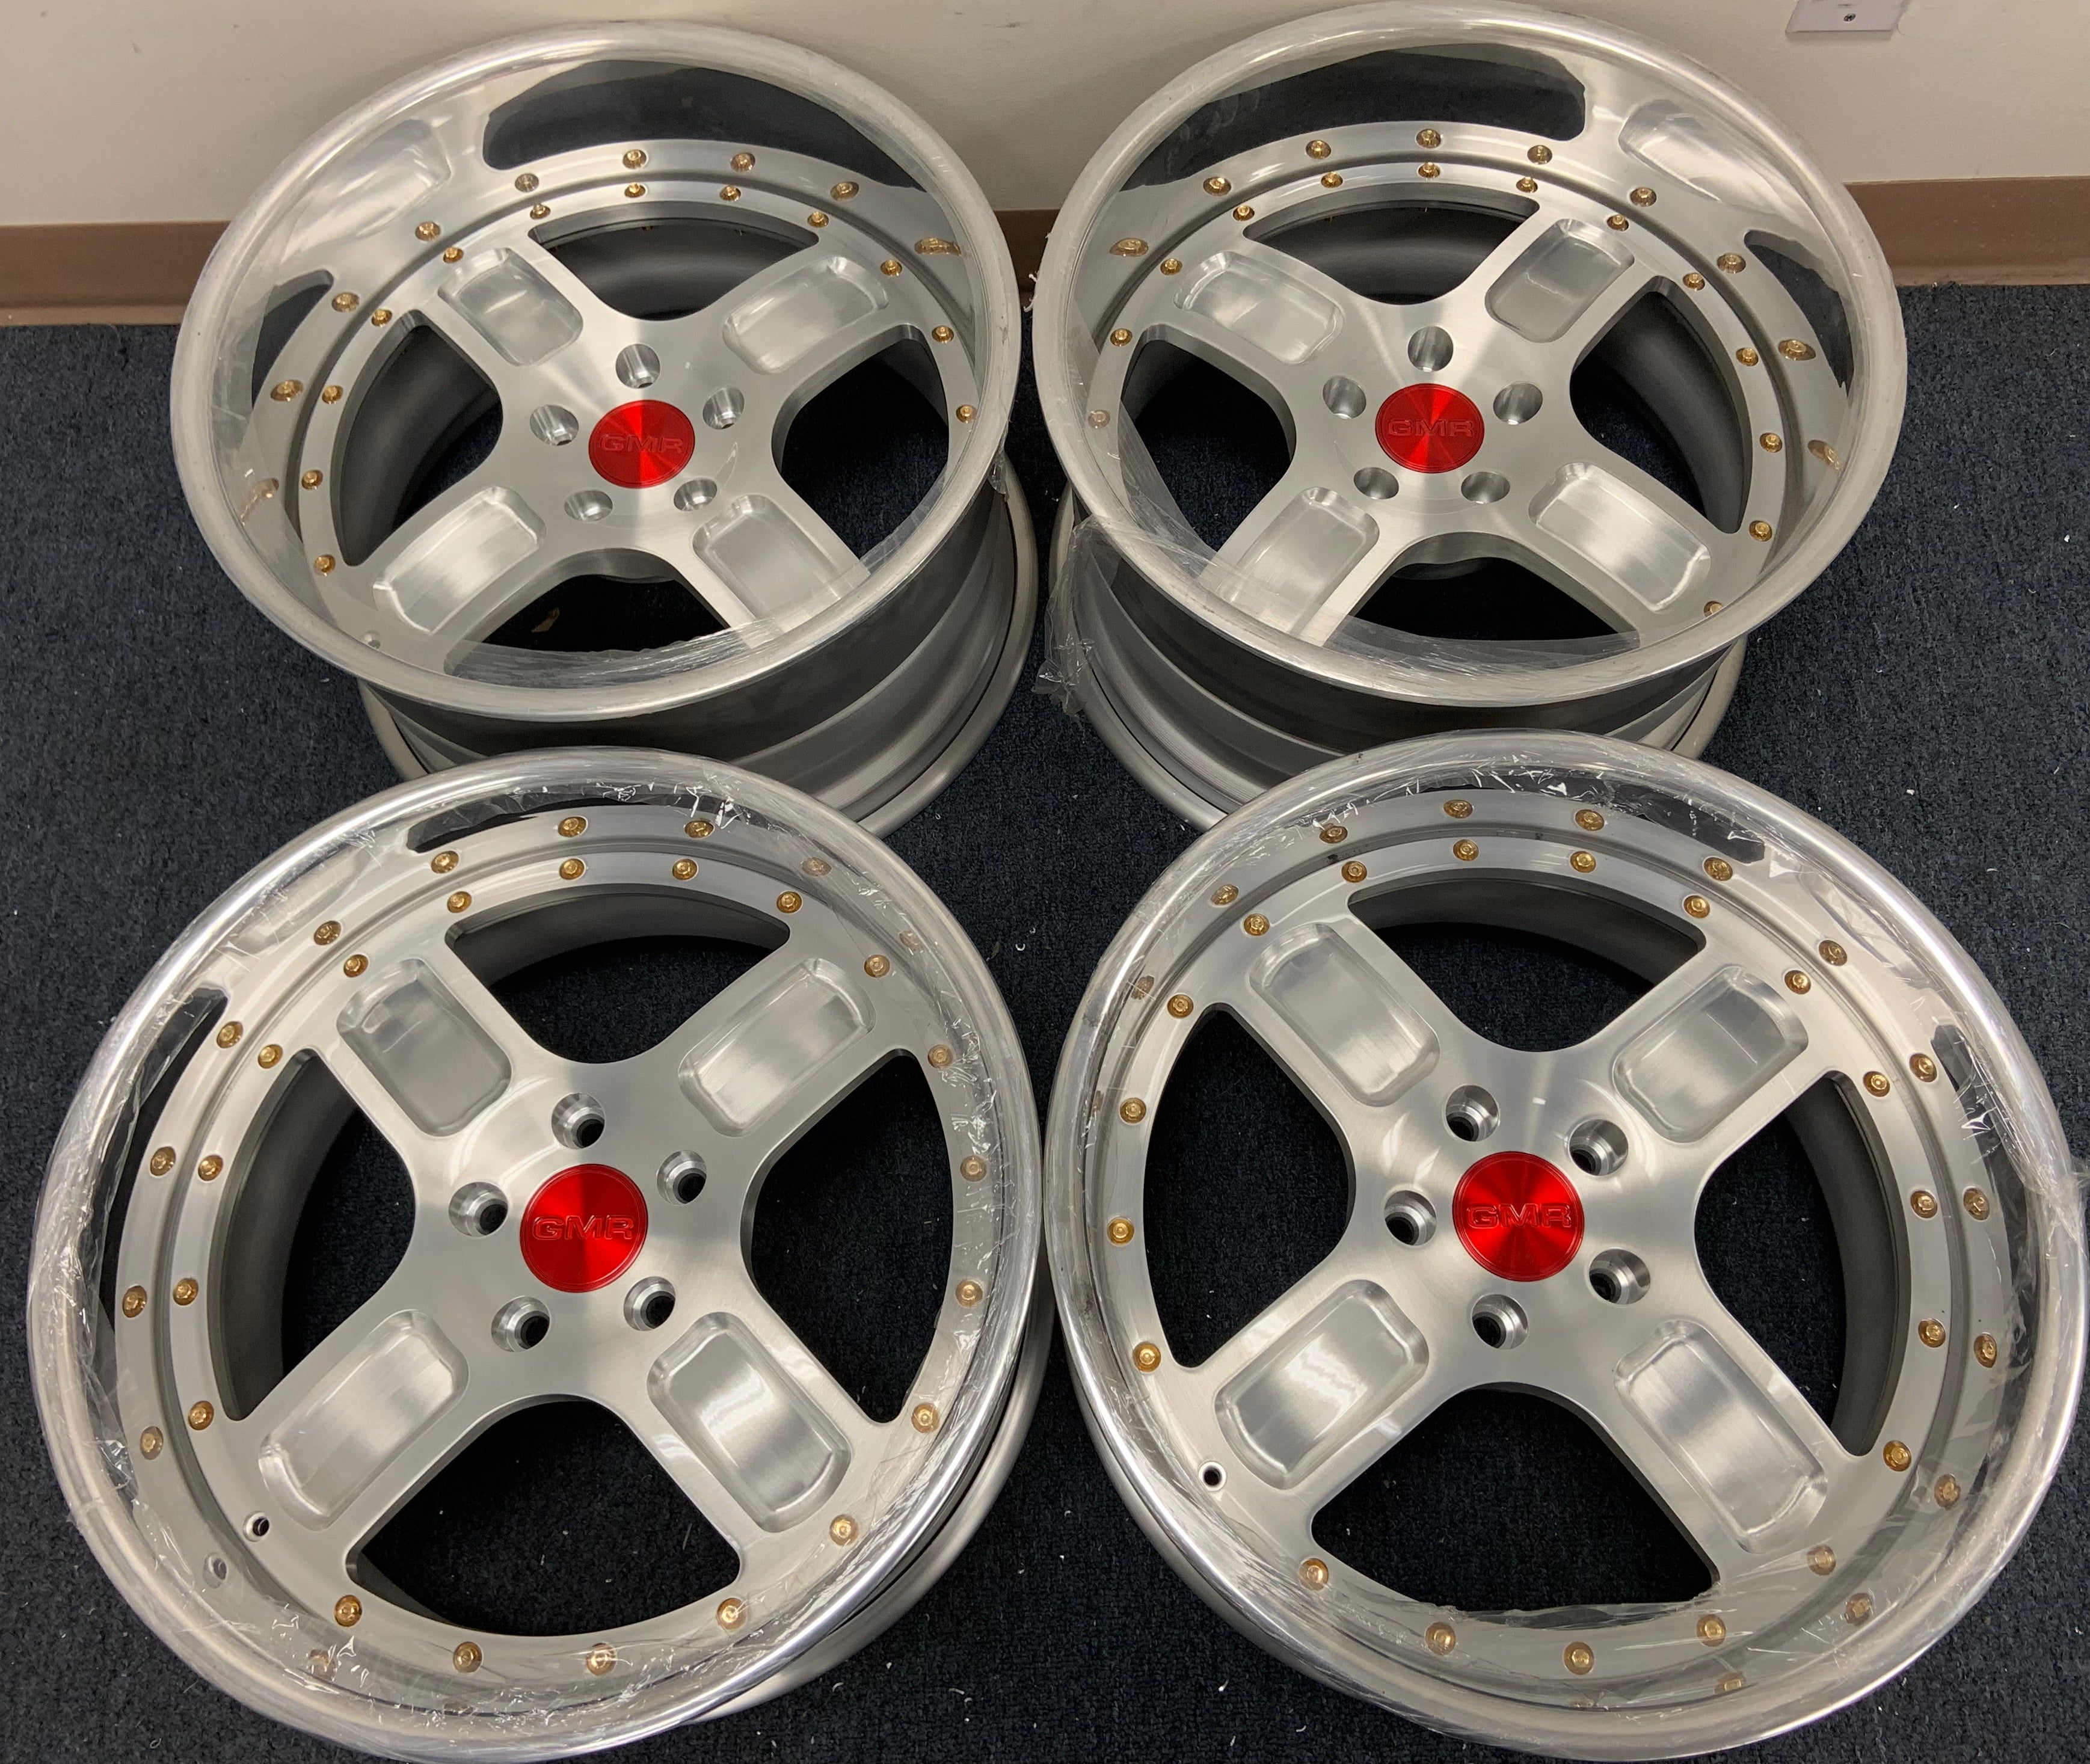 18” GMR CH-5 5x114.3 *BUILT TO ORDER*